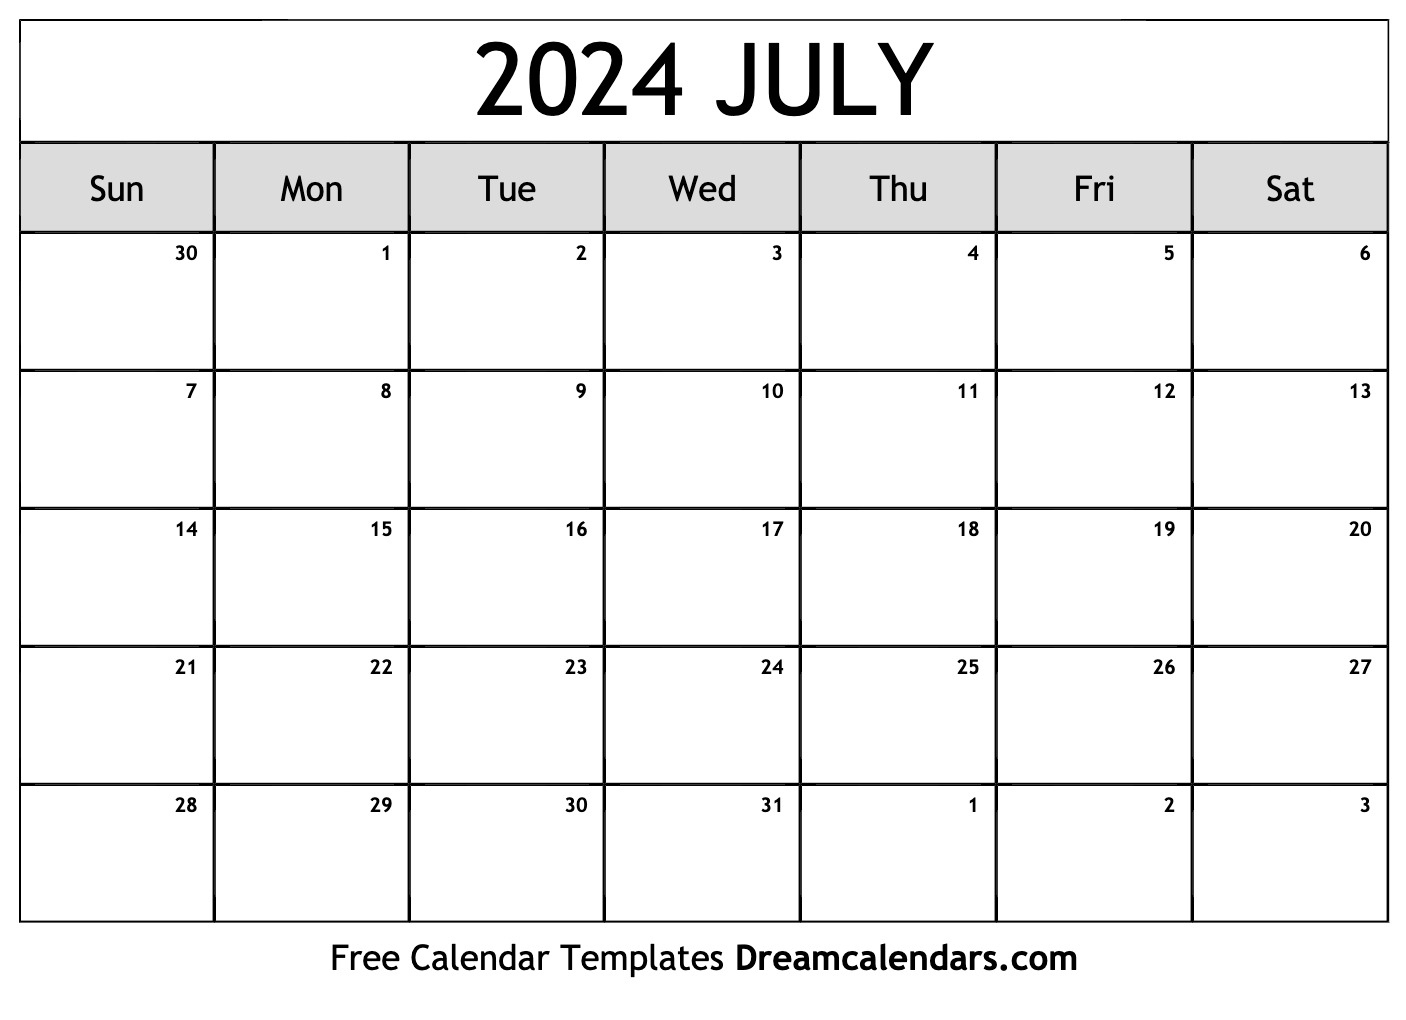 July 2024 Calendar - Free Printable With Holidays And Observances | Calendar Of Saints July 2024